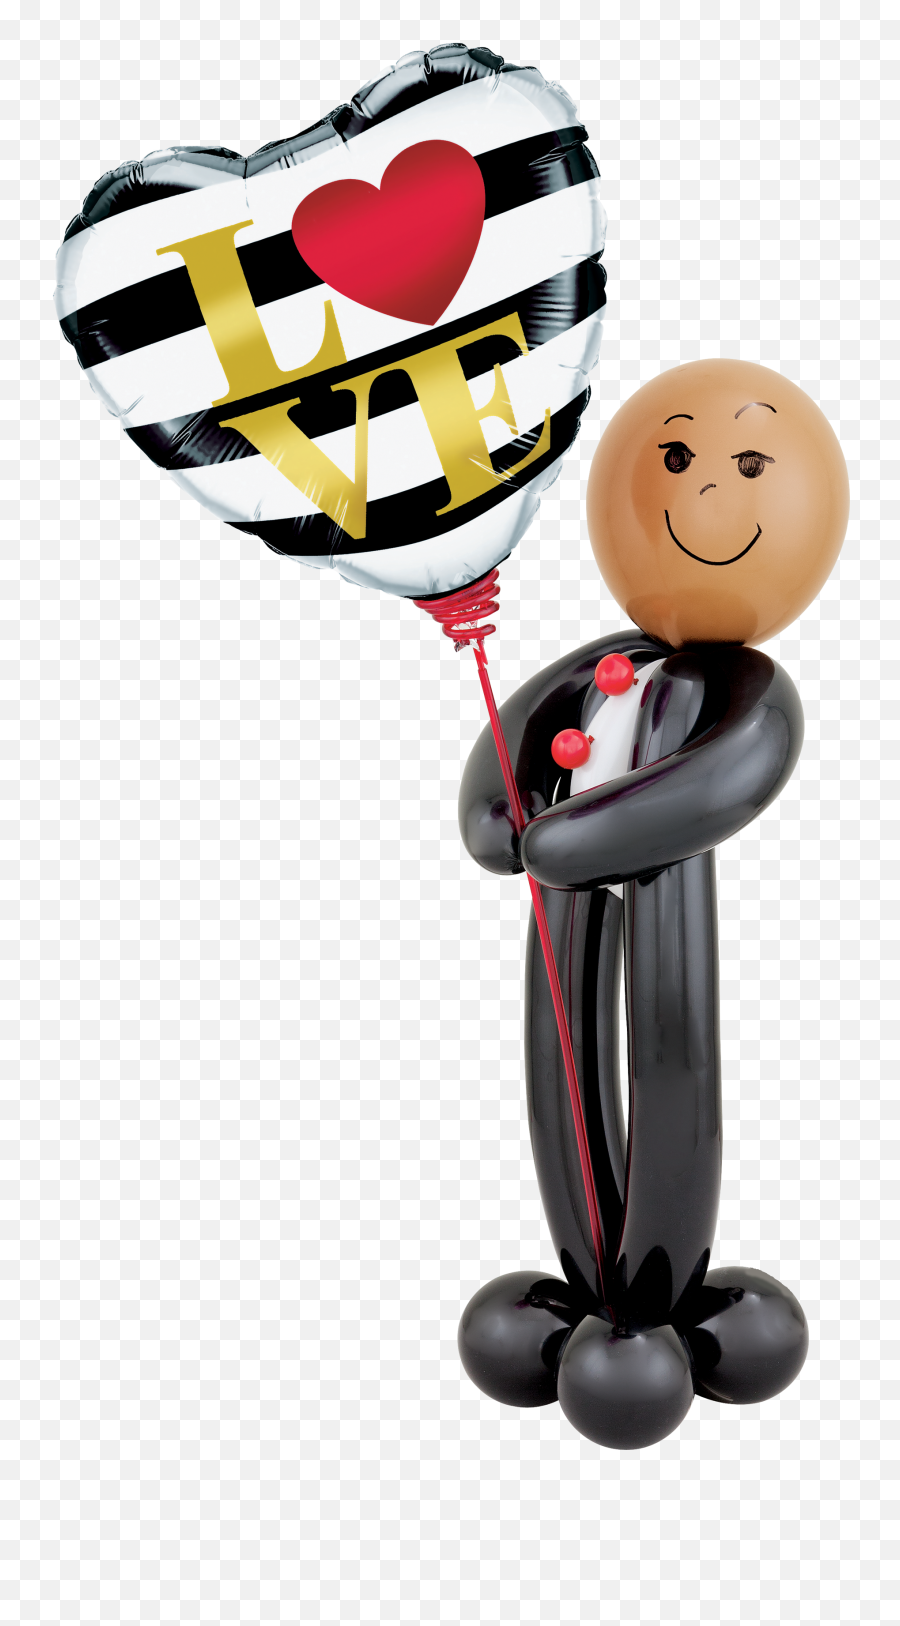 Valentines Day Balloons Flowers Chocolate Gifts Kelowna - Balloon Emoji,Lovey Emoticon For Fb